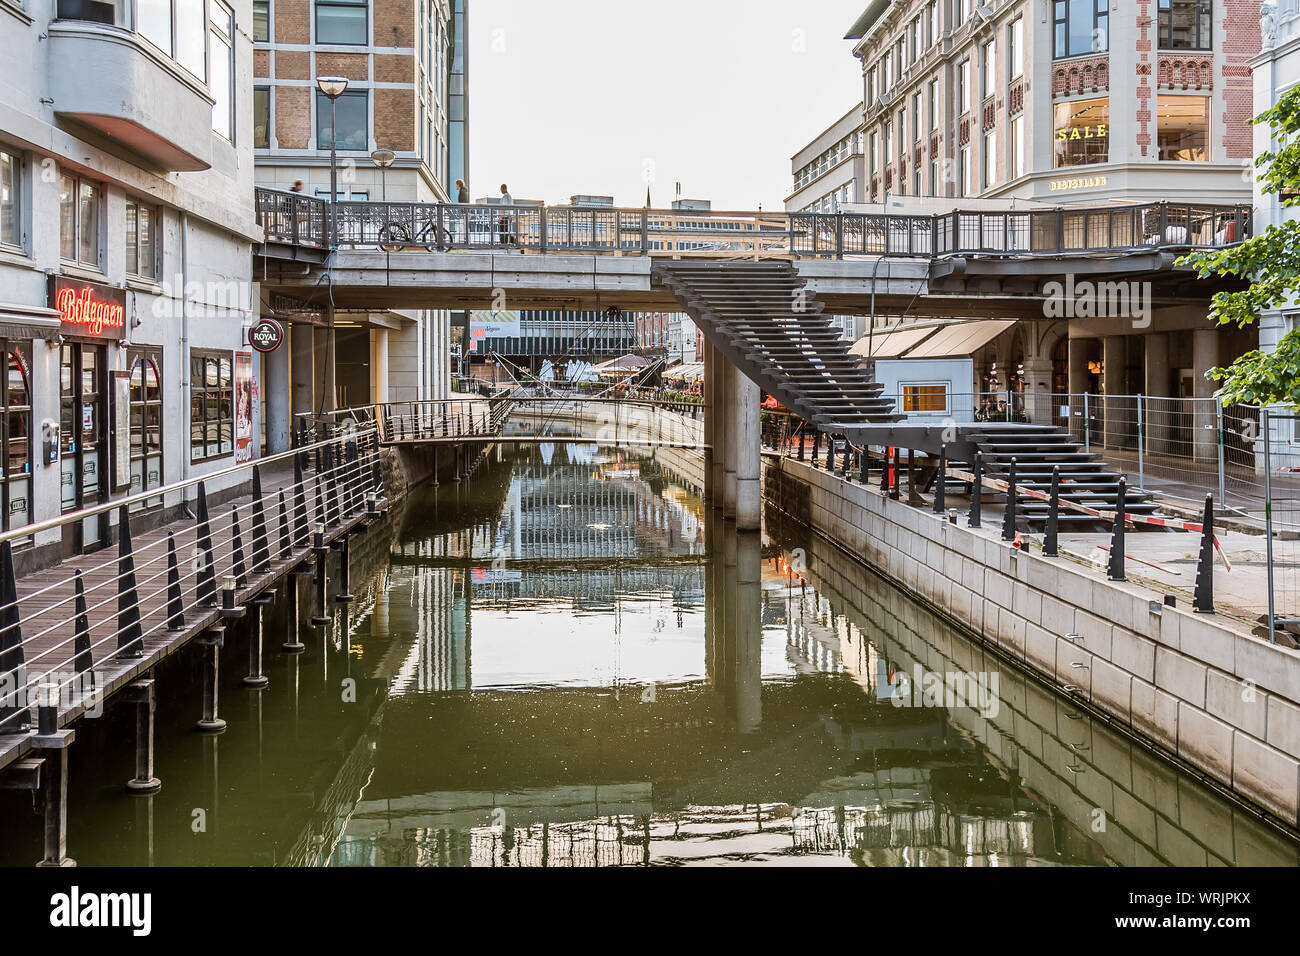 Aarhus city with bridges and shops at night reflecting in the canal, Denmark, July 15, 2019 Stock Photo